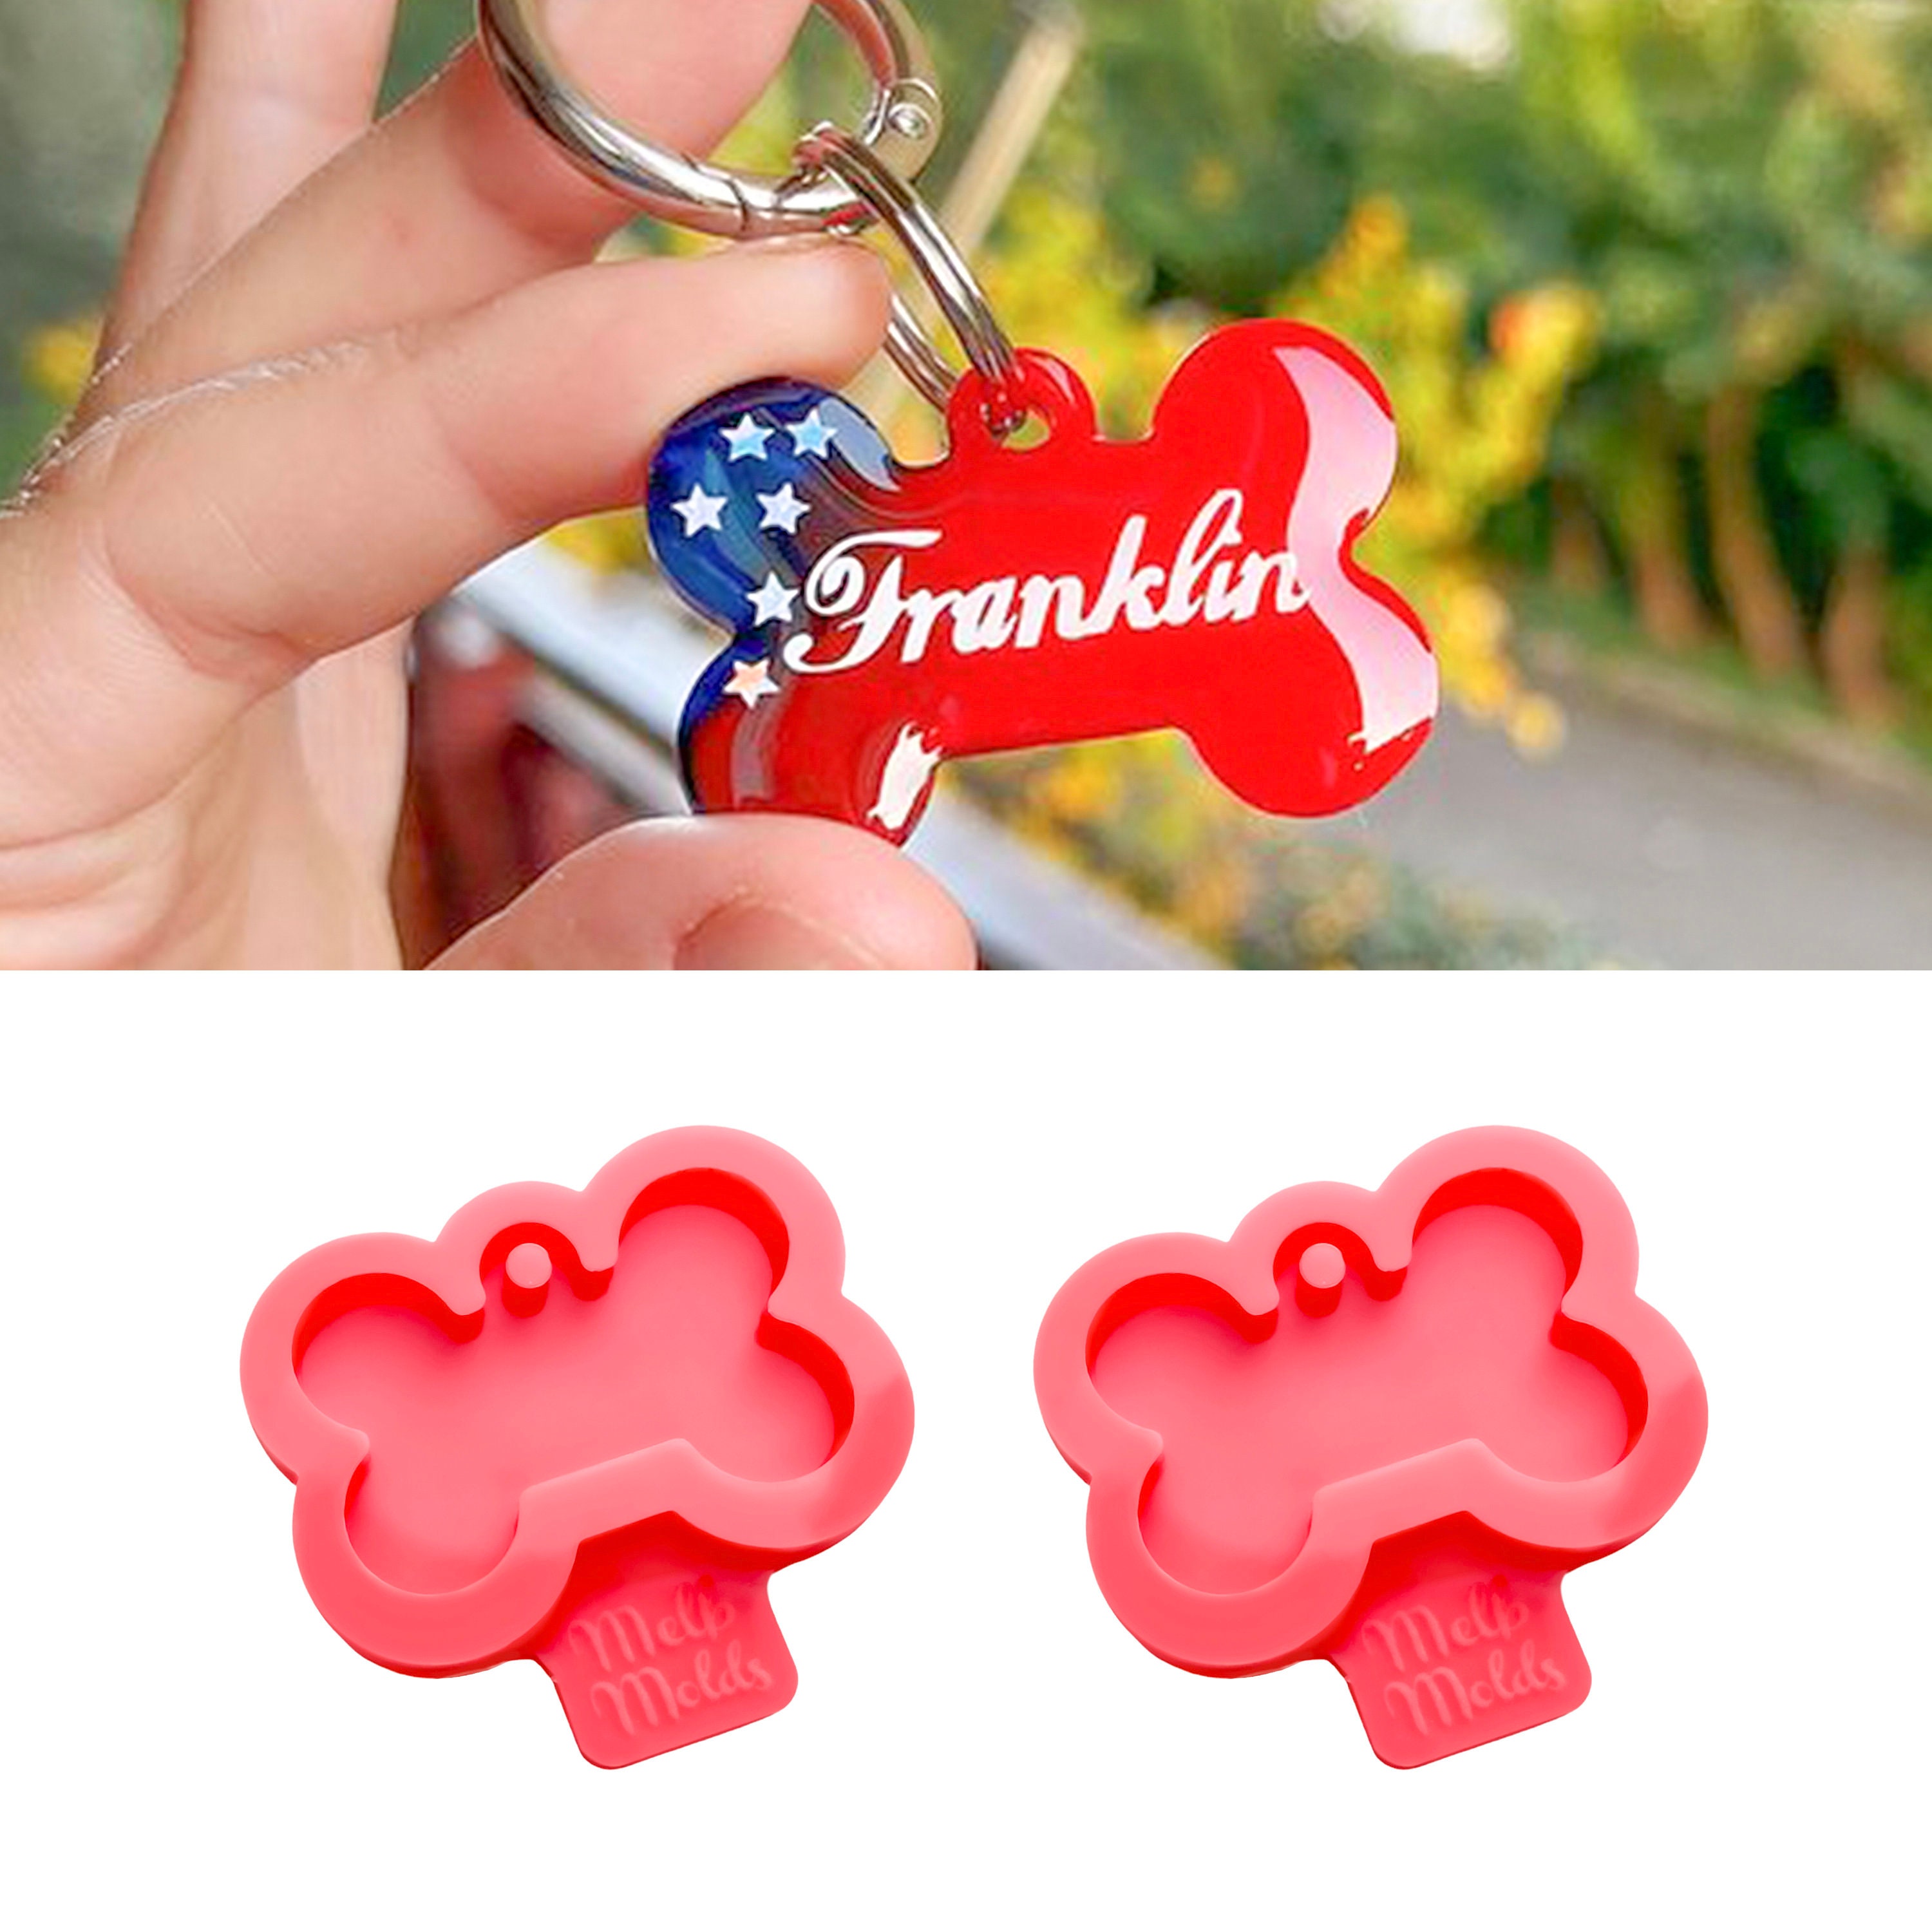 Dog Carrier Tag Resin Mold Silicone Pendent Making Reusable Unique Shape  Casting Molds For Birthday Gift And From Kuguacaig, $6.8